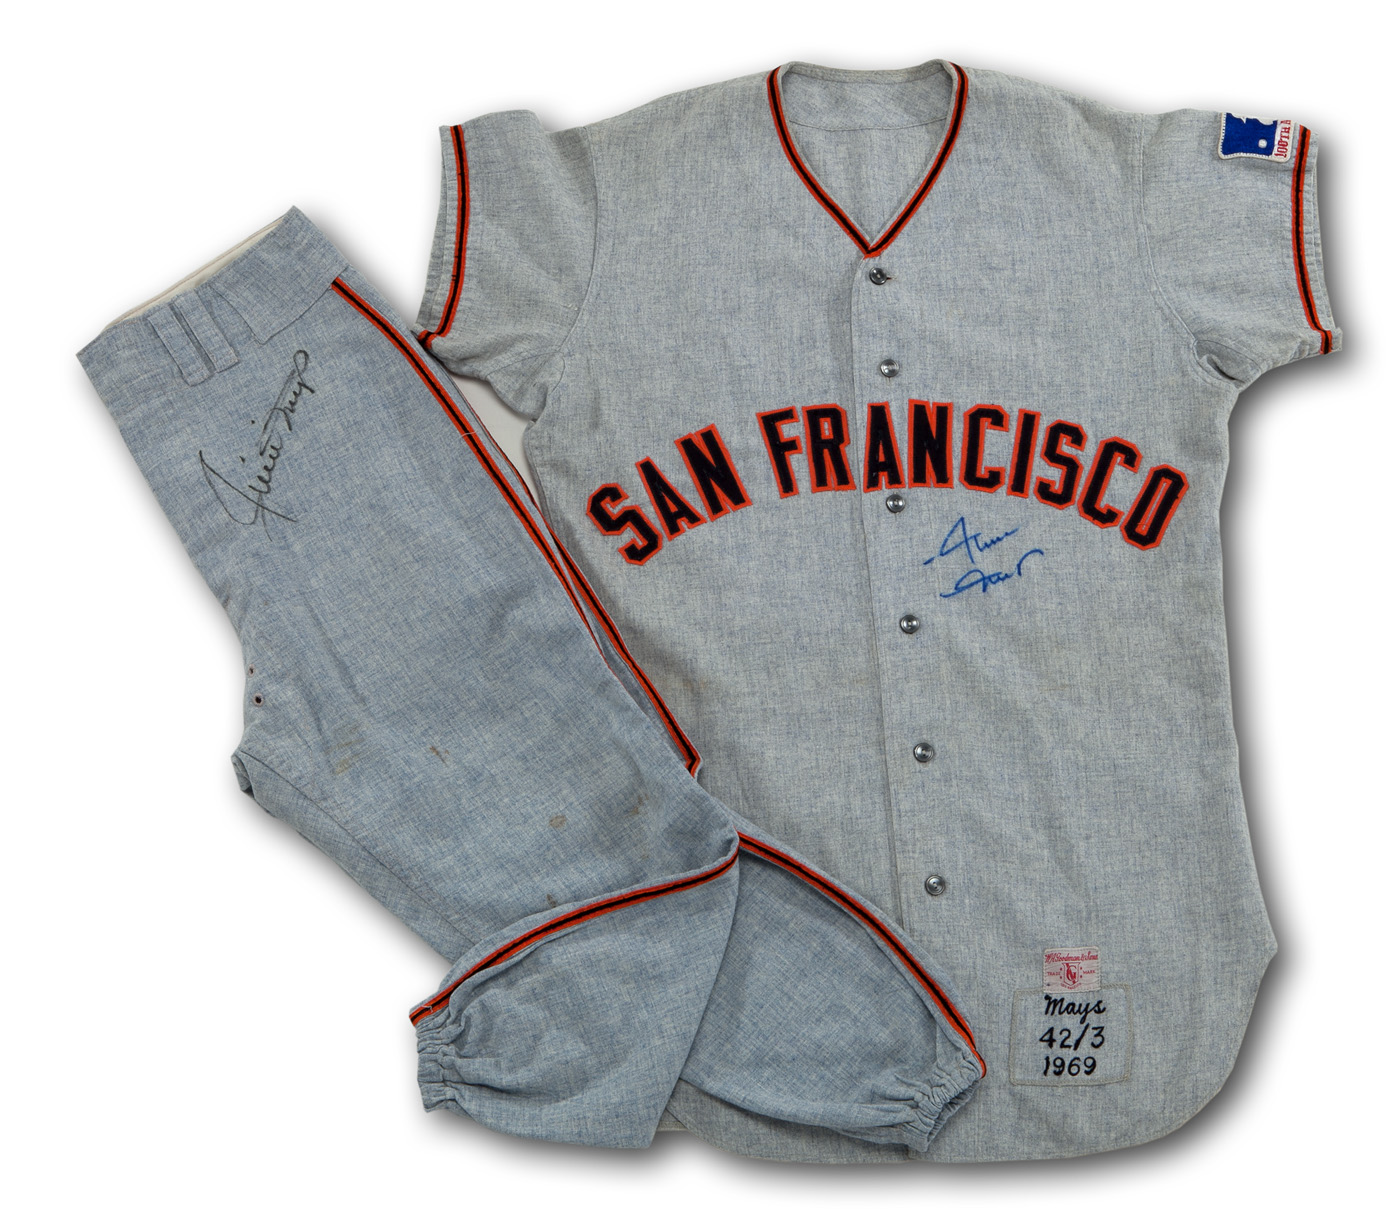 A jersey worn by Willie Mays during Giants' first year in S.F. is